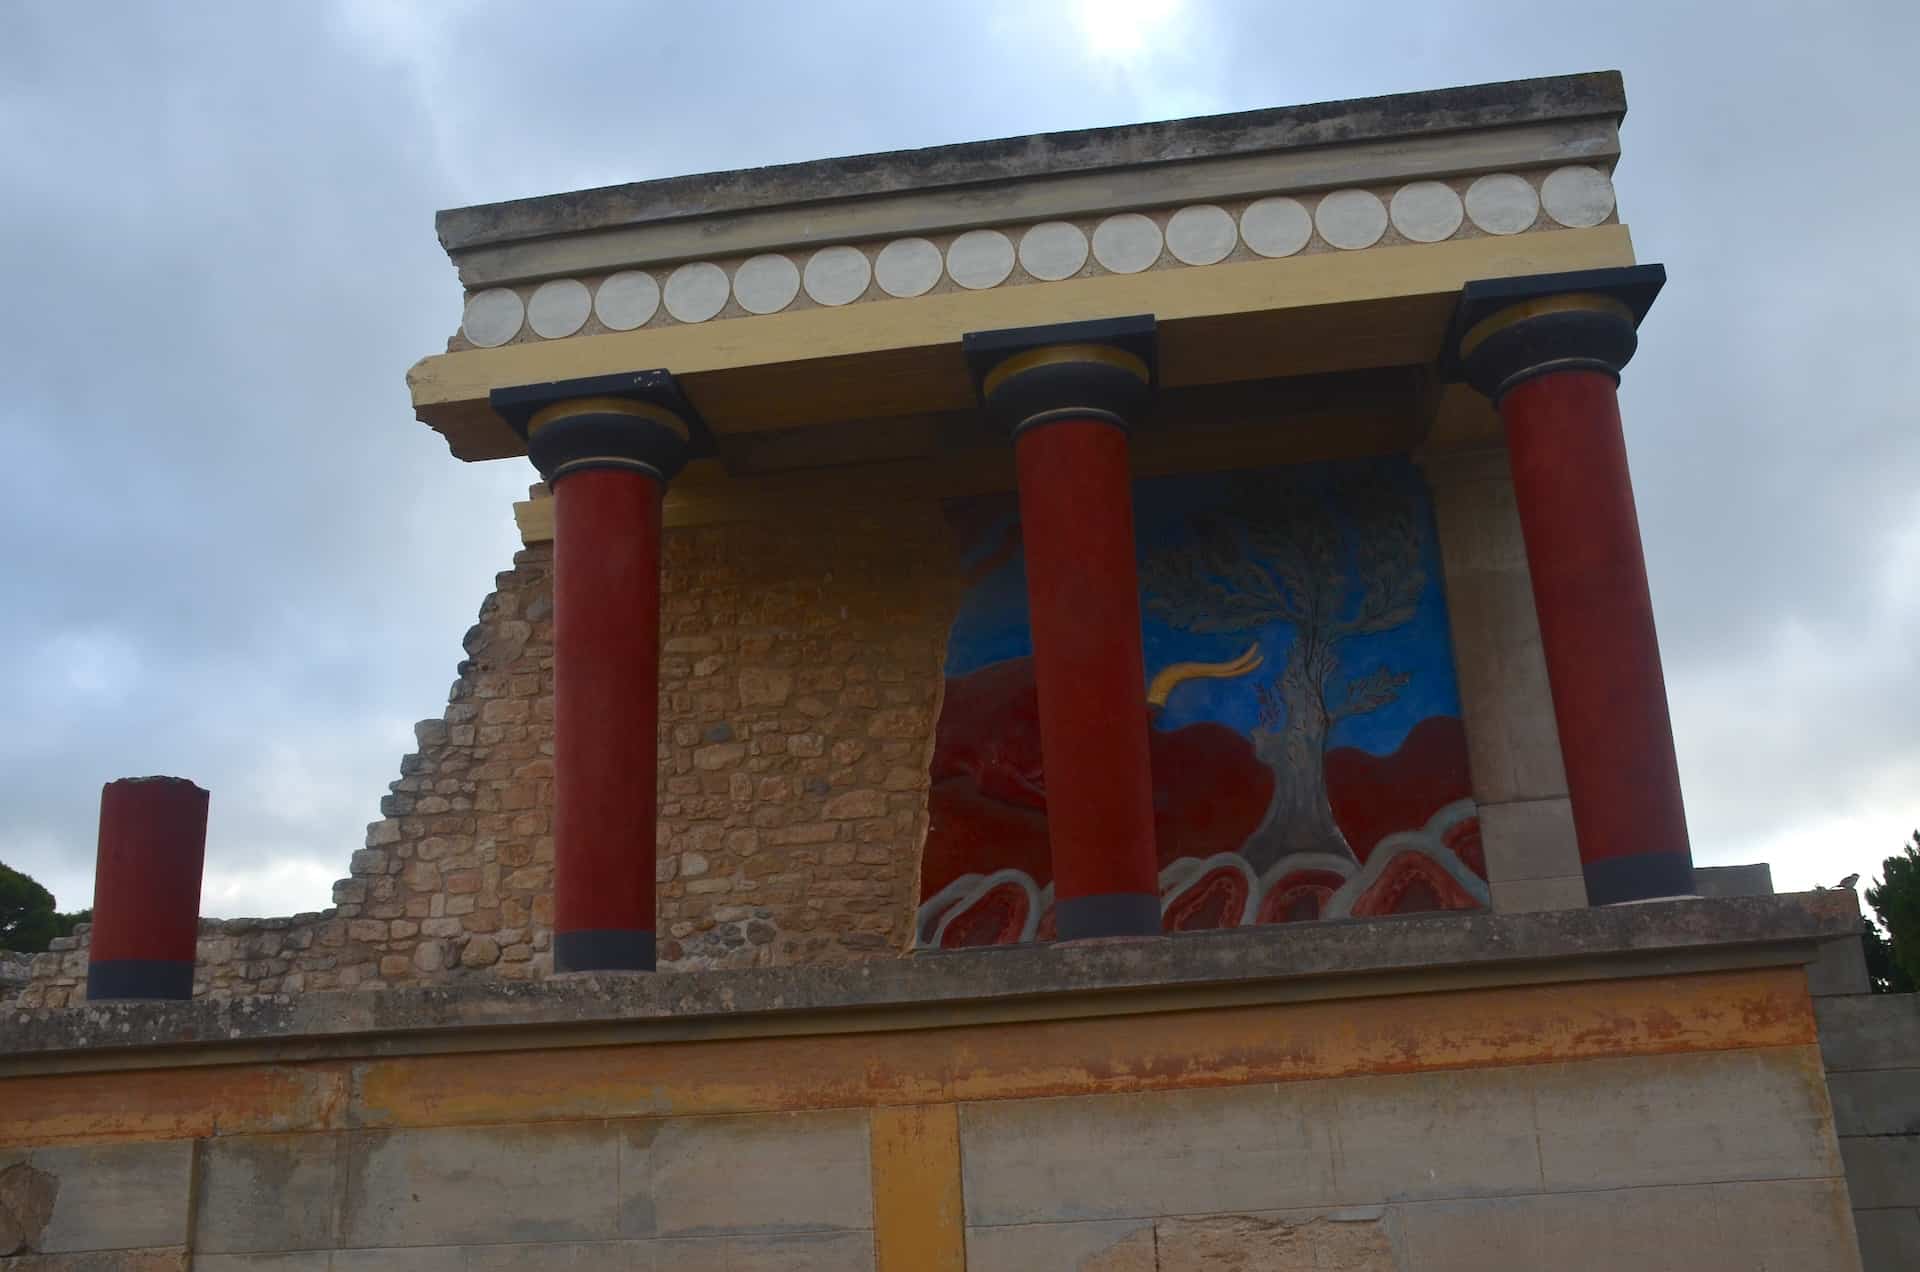 West Bastion of the North Passage at Knossos, Crete, Greece